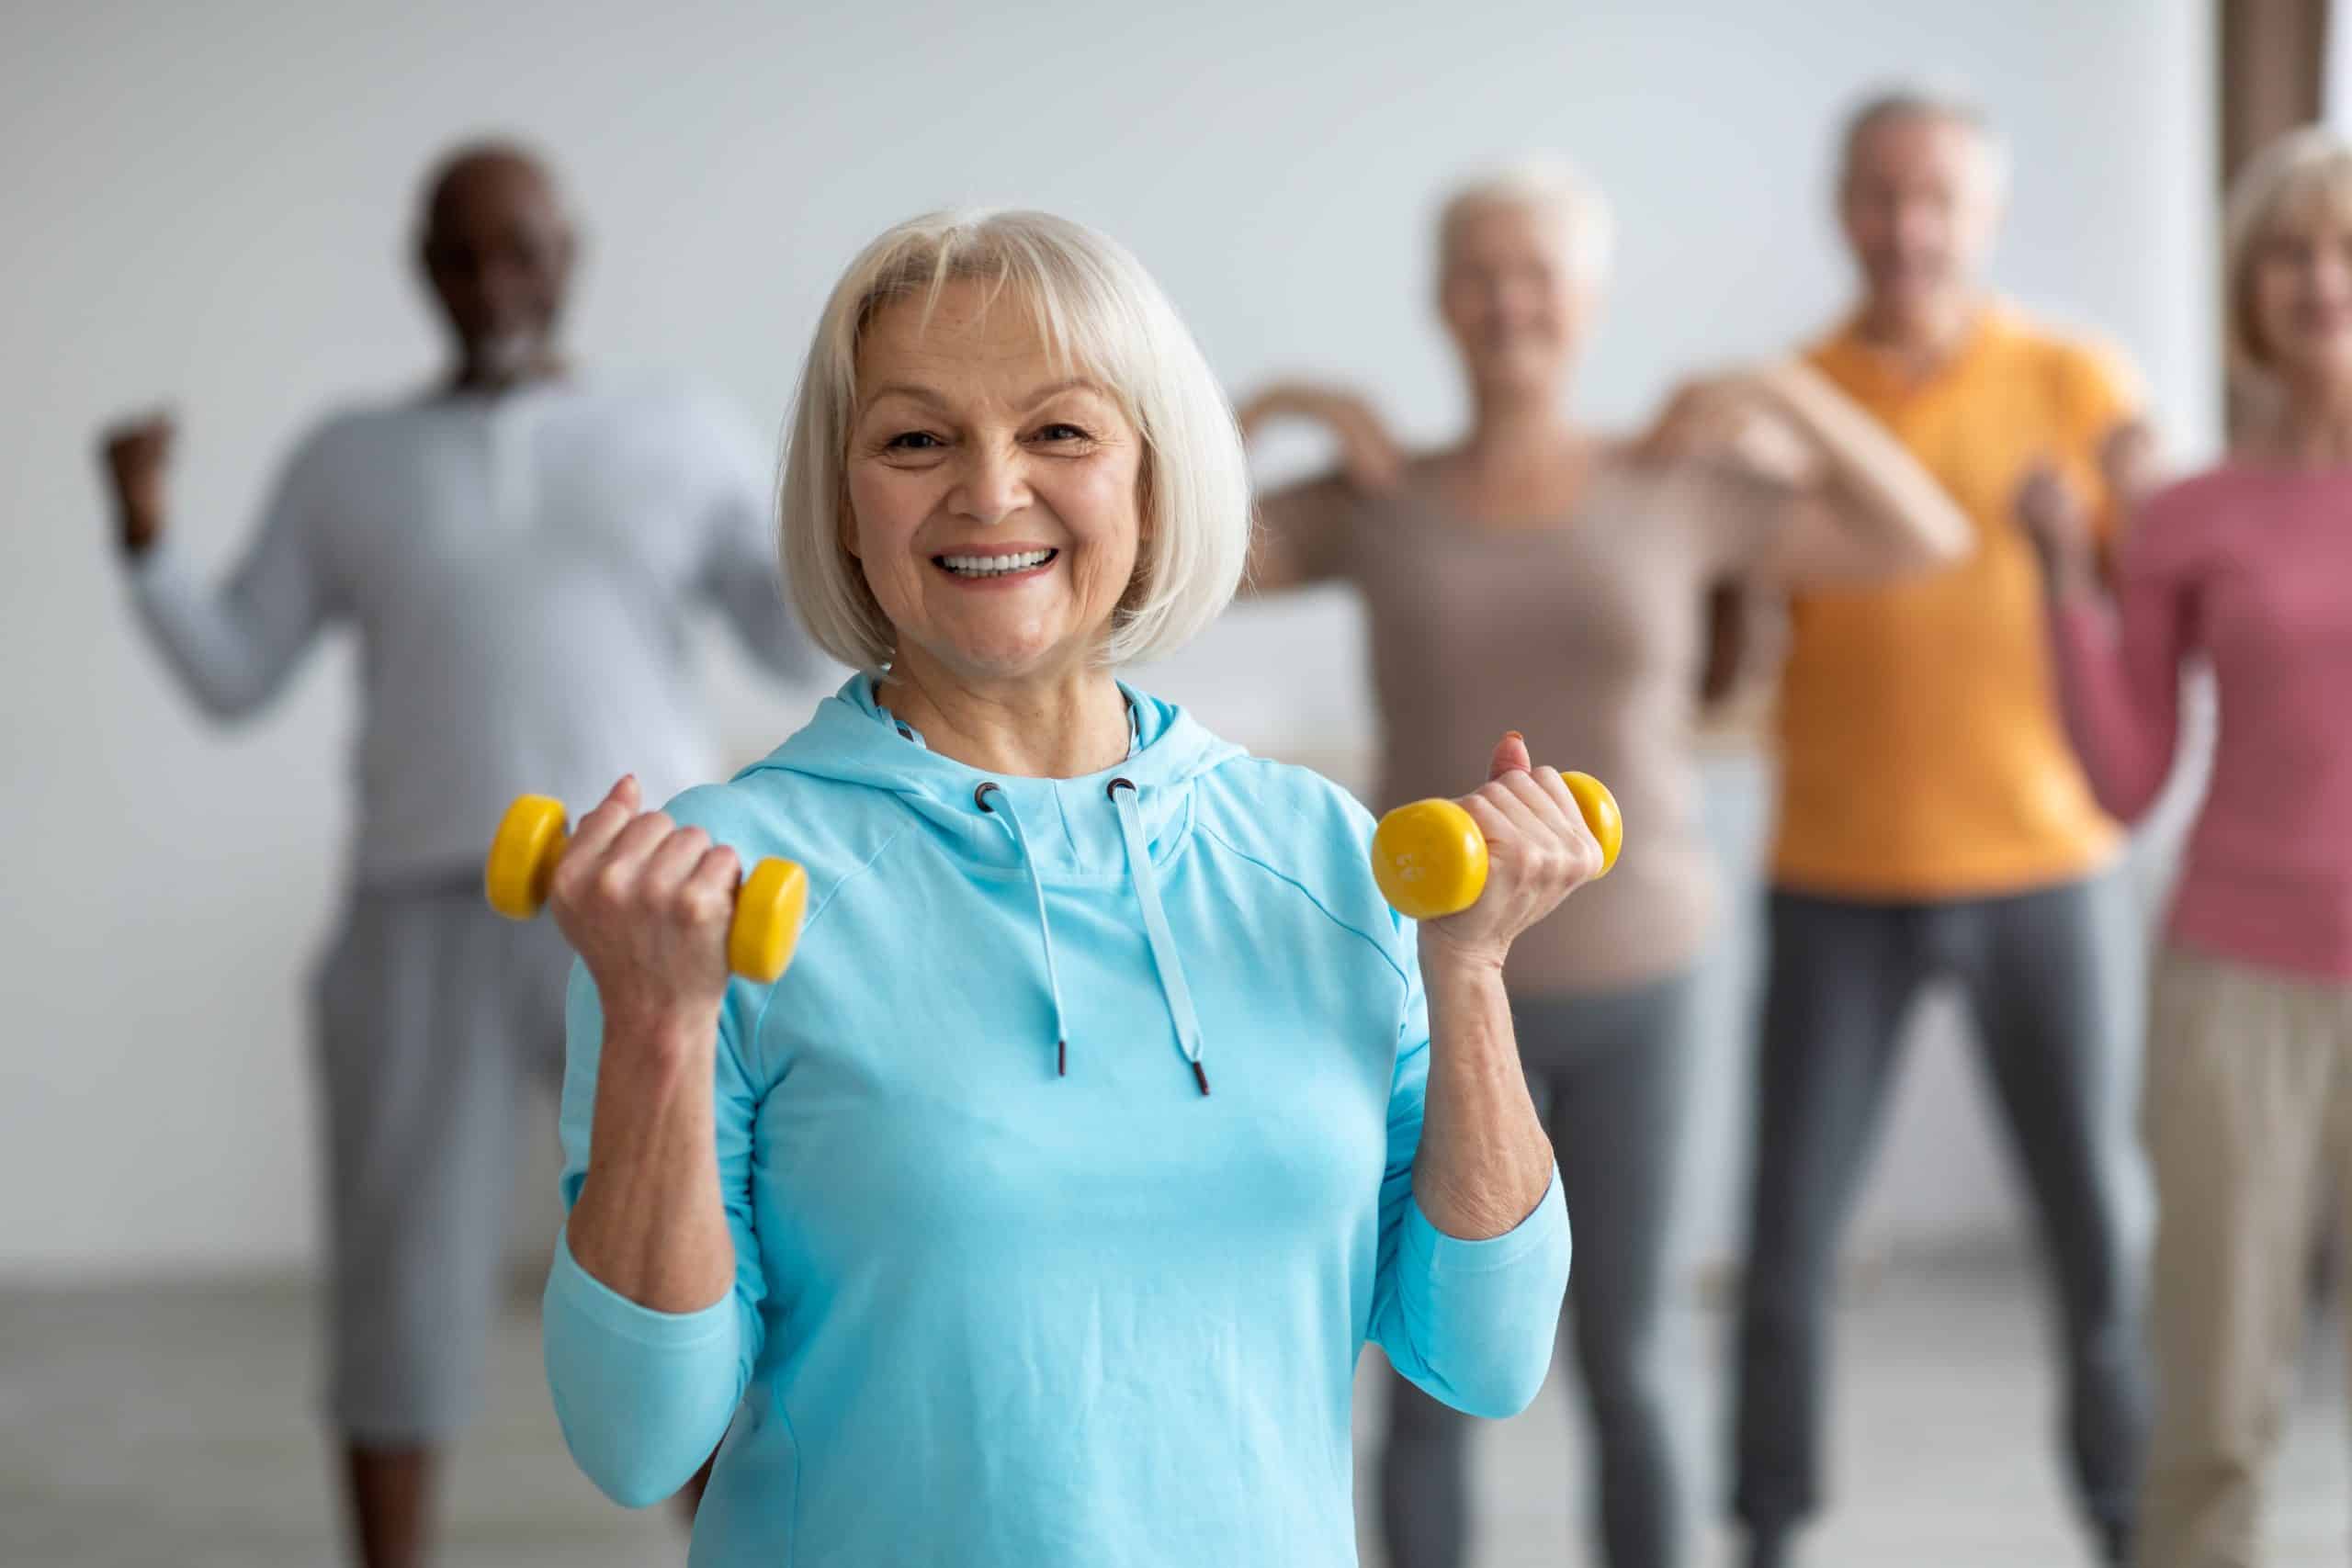 Easy At Home Exercises For Elderly To Stay Healthy And Active - BetterMe